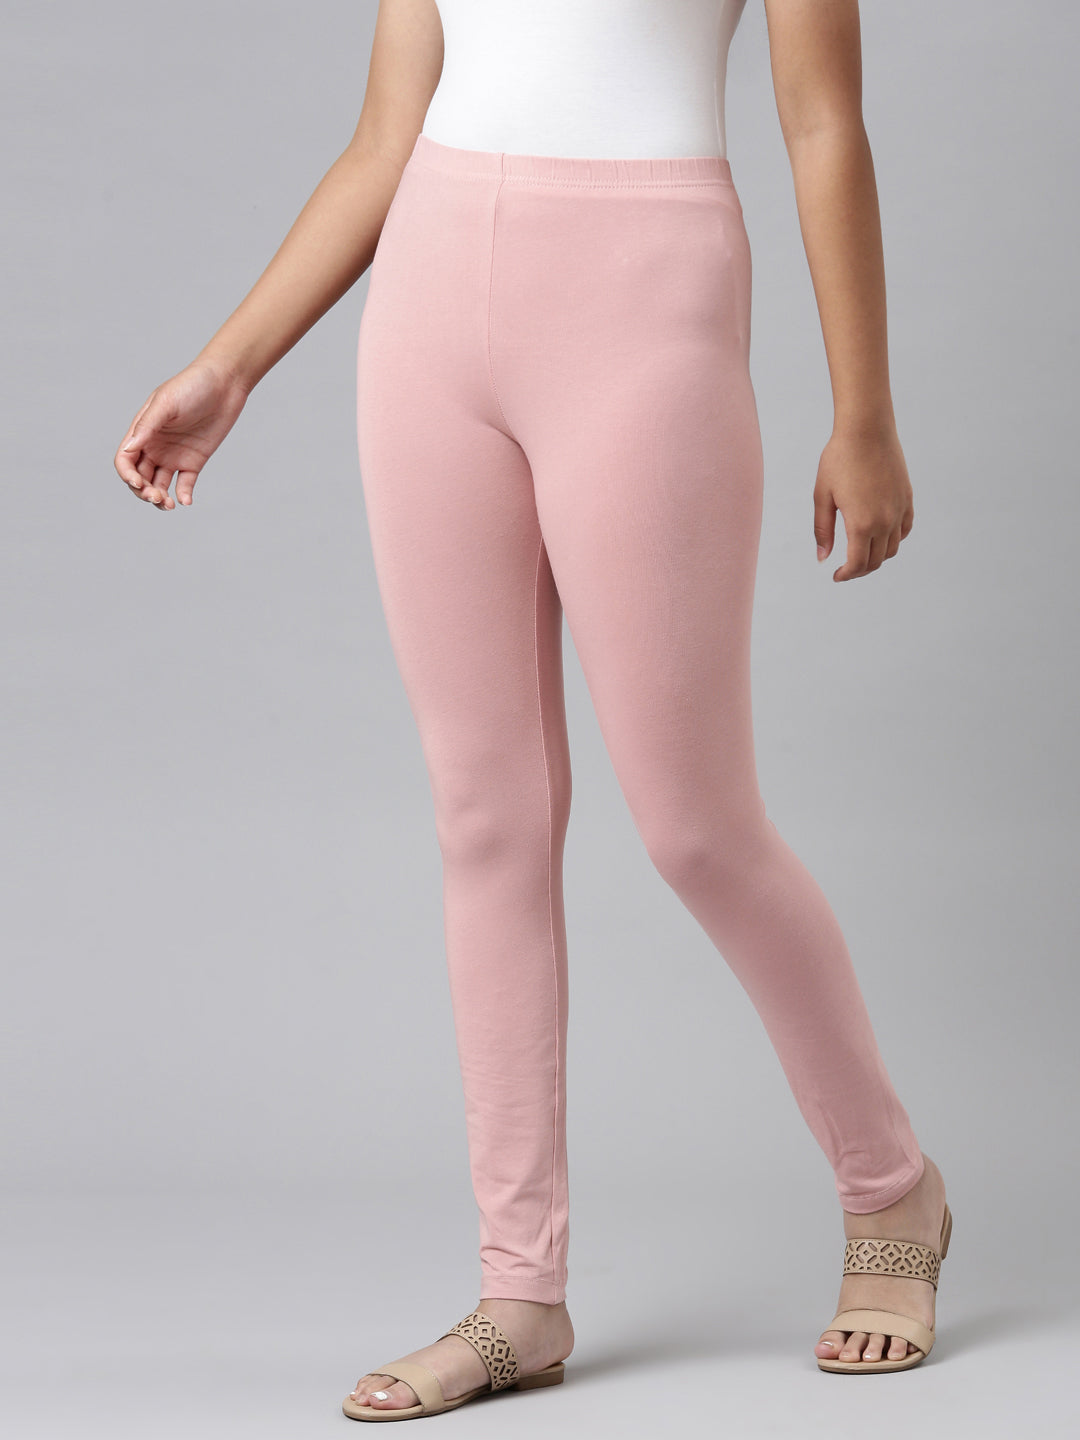 Women's Casual Ankle Length Leggings (One Size, Pink) 